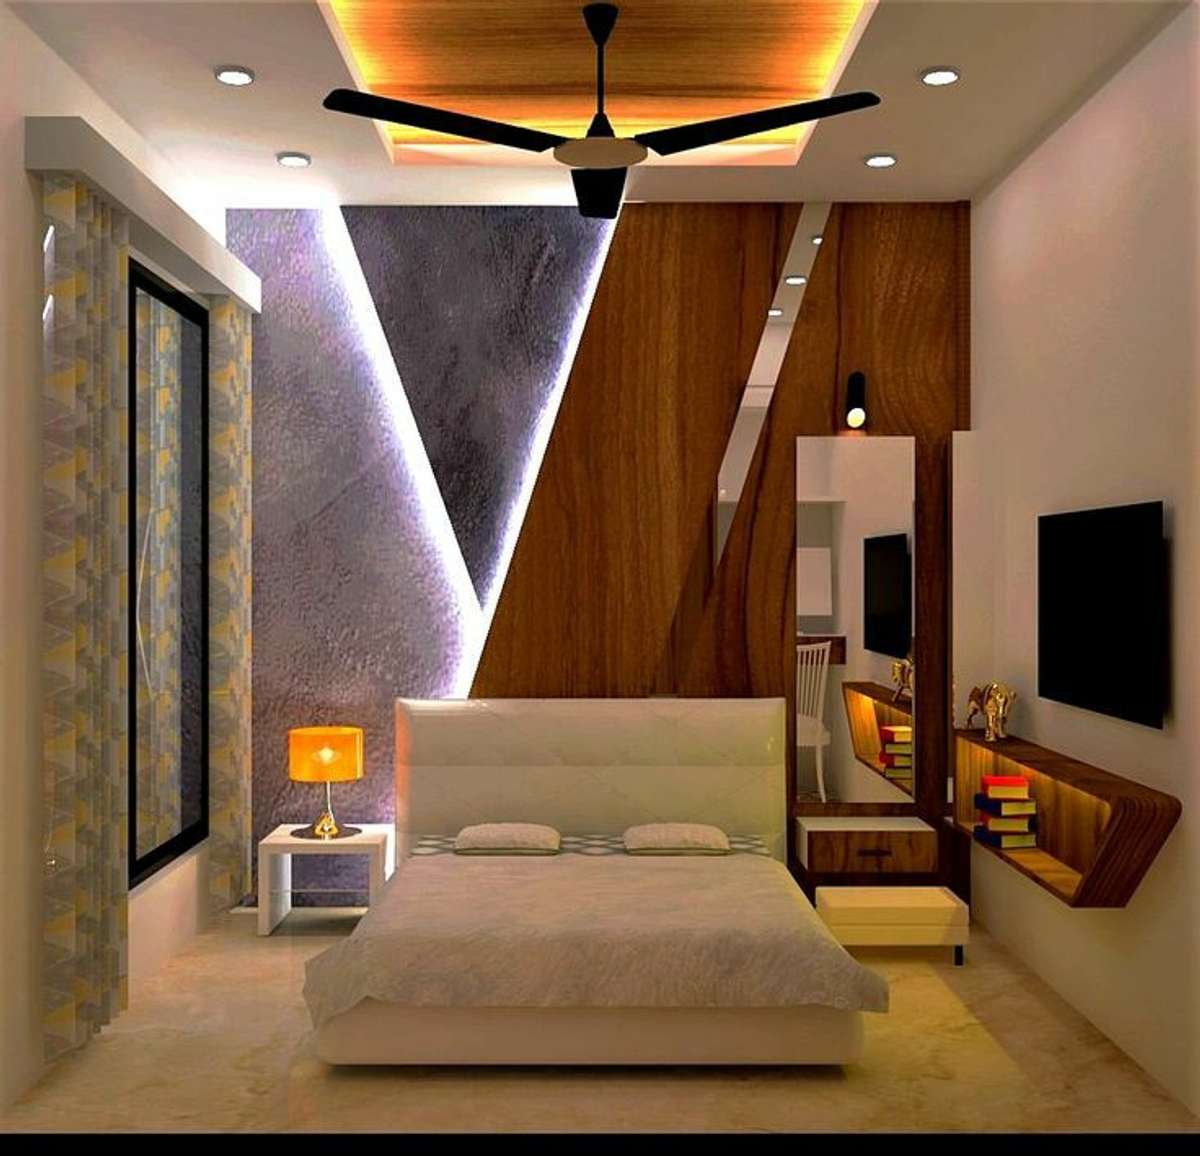 Find here the best home interiors and get design your Entire Home Including your ✓Livingroom ✓Bedroom ✓Kitchen ✓Bathroom and everything.
.
.
.
contact us  9953725277
Email I'd: info@cultureinterior.in
Website: www.cultureinterior.in

Please do like ,share & subscribe our you tube channel https://youtube.com/channel/UC9Hm9090aOlJOcszdAb6-PQ
.
.
.
#interiors #interiordesign #interior #design #homedecor #decor #architecture #home #interiordesigner #homedesign #interiorstyling #furniture #interiordecor #decoration #art #luxury #designer #inspiration #interiordecorating #style #homesweethome #livingroom #interiorinspo #furnituredesign #handmade #homestyle #interiorstyle #interiorinspirations